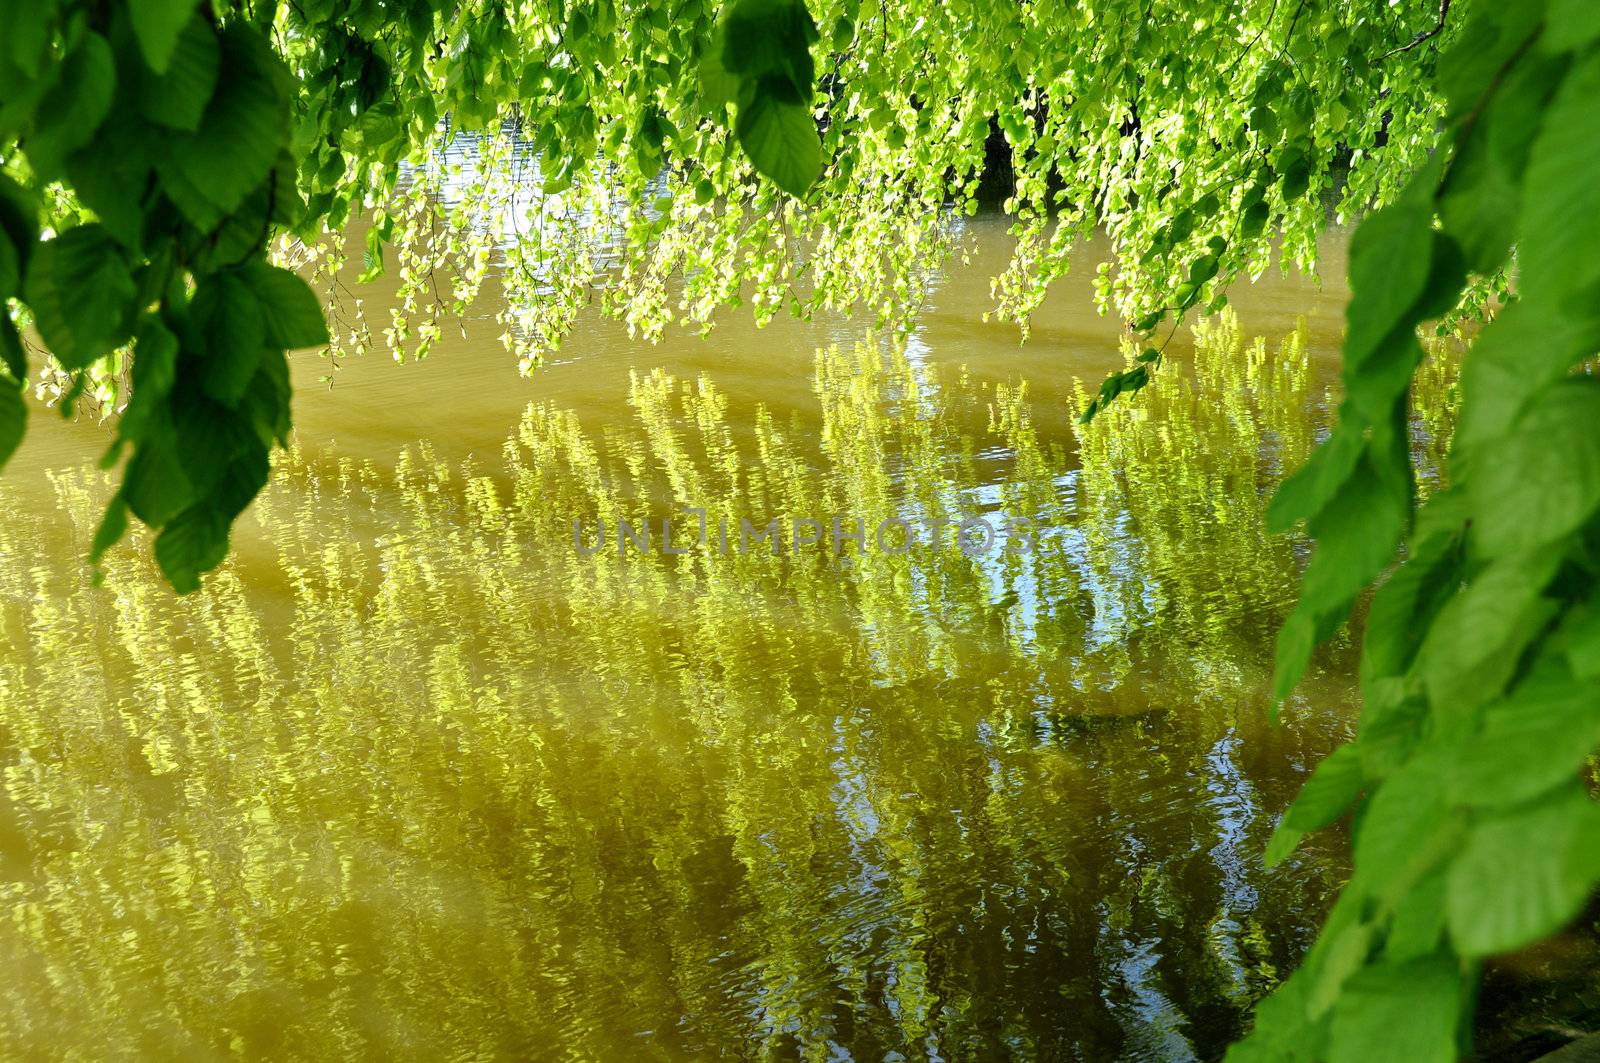 Tree leaves reflecting on a pond, spring season